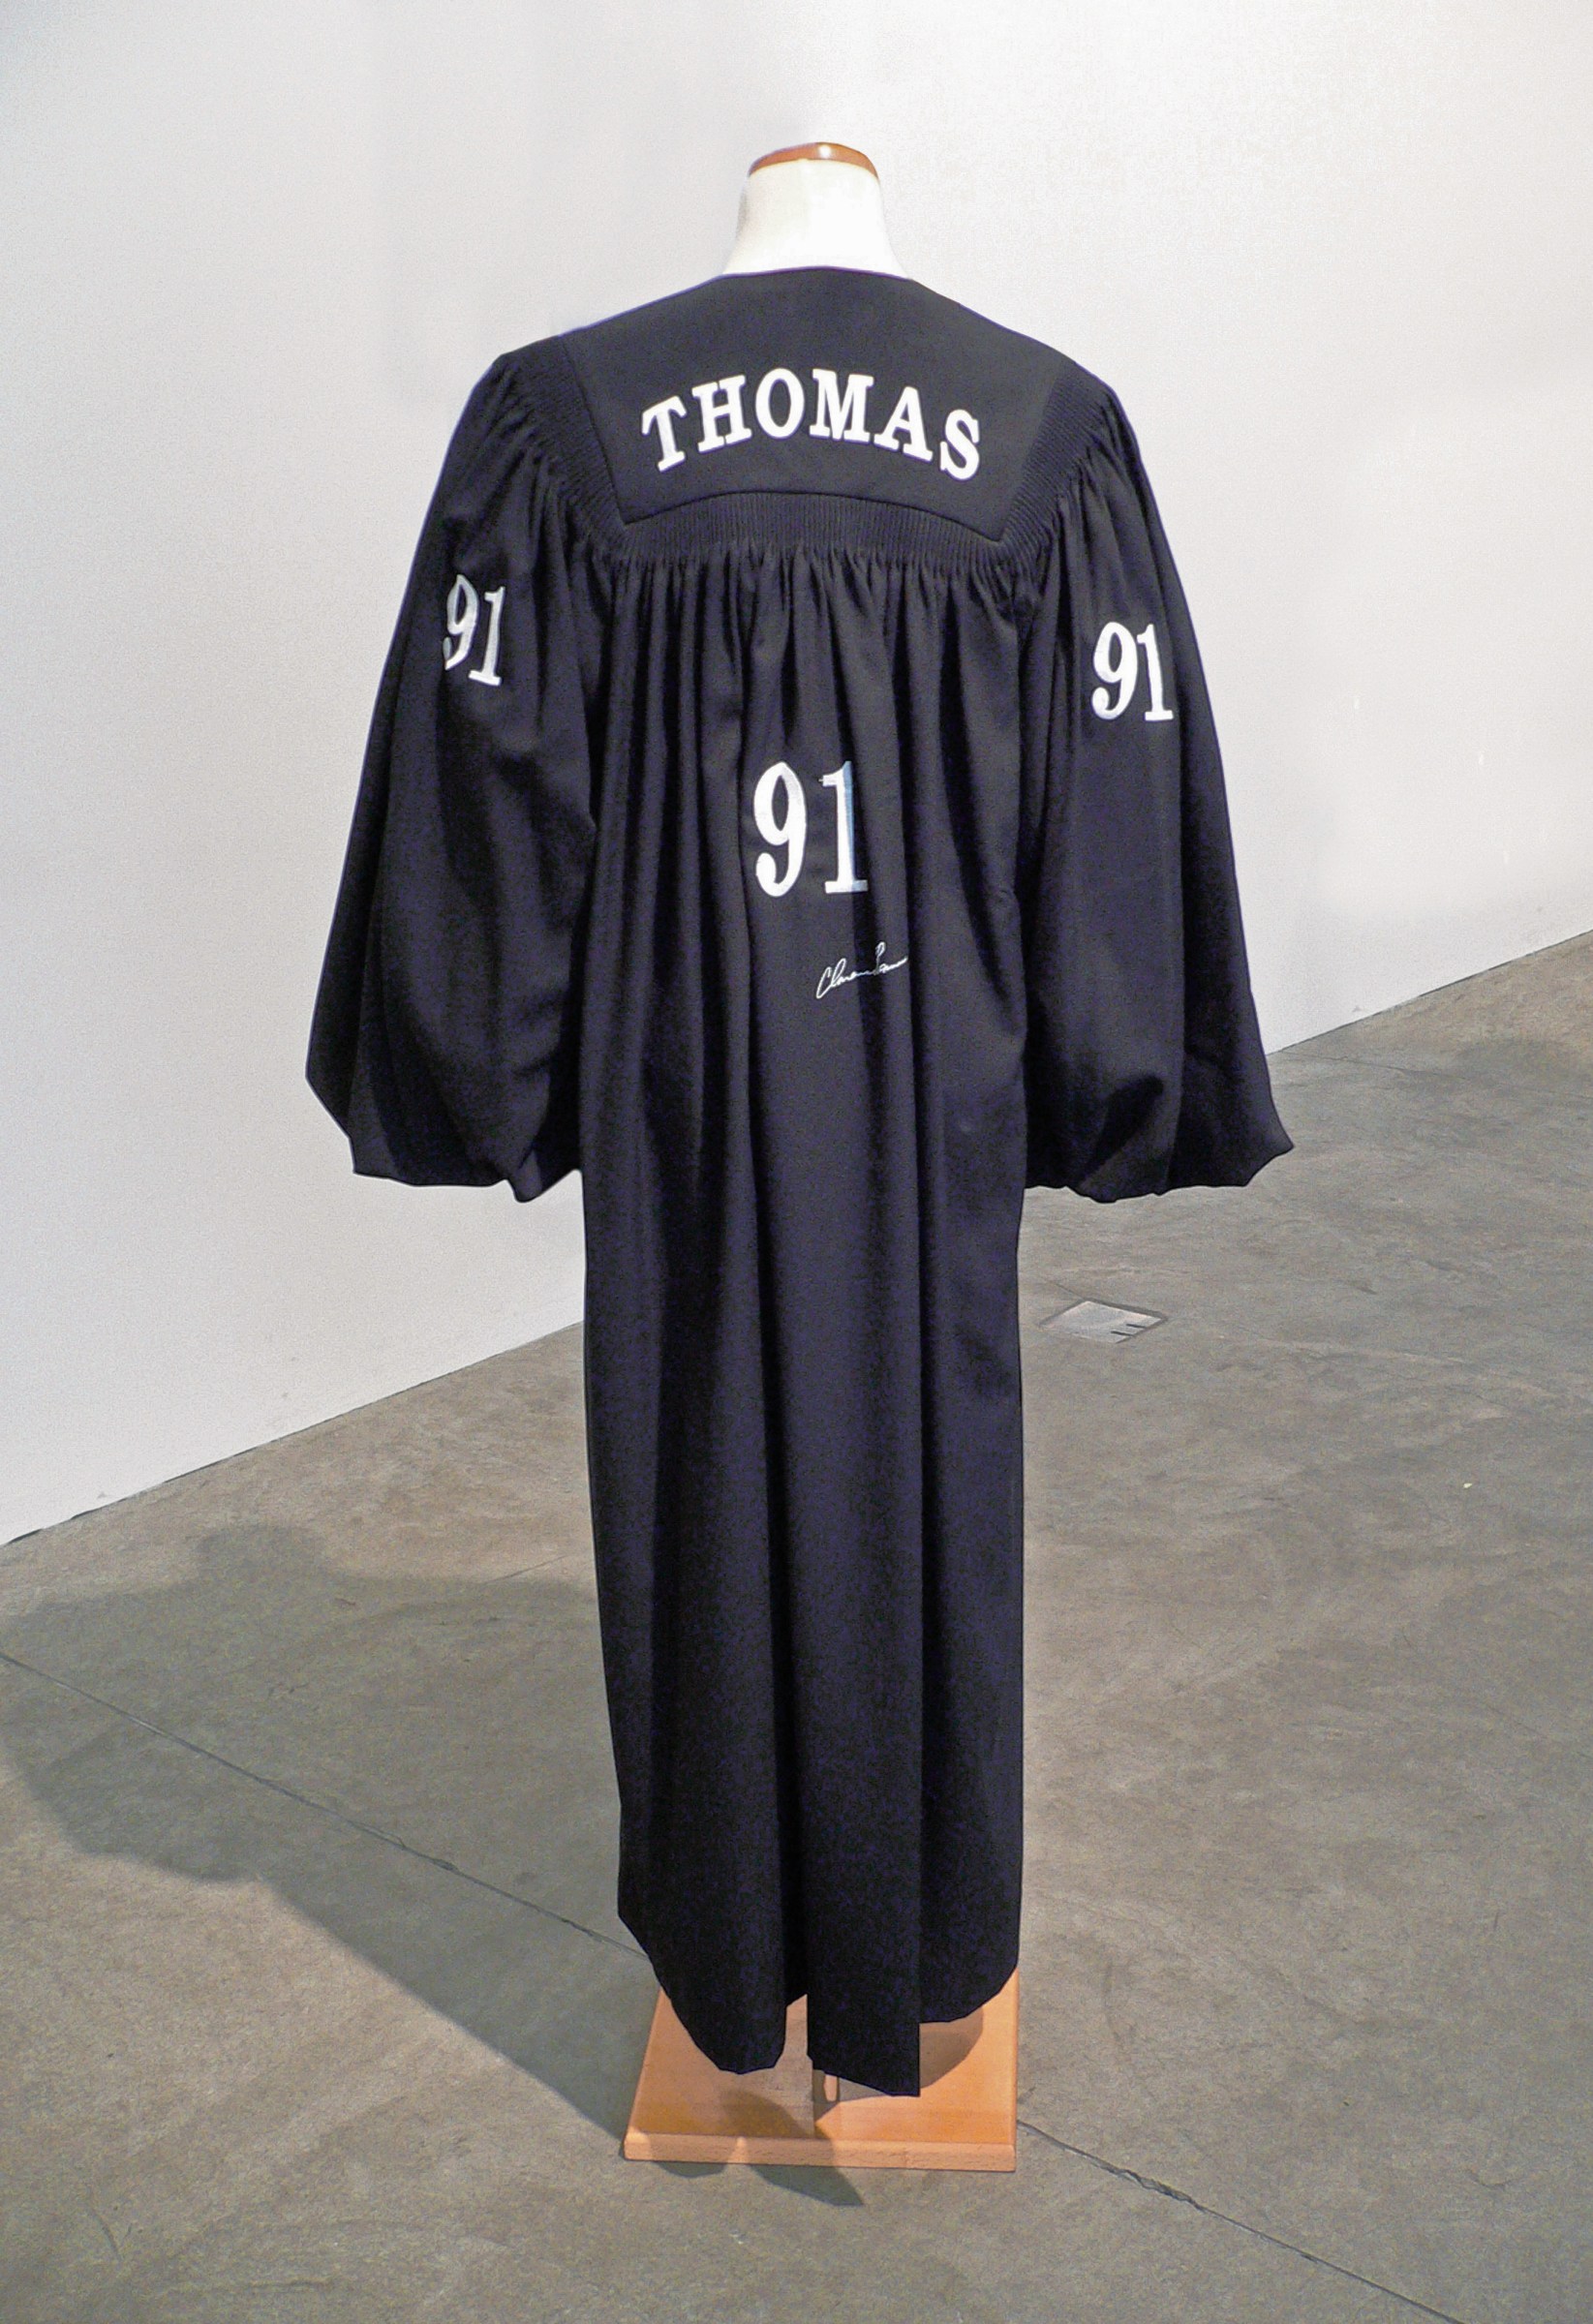 Rashid Johnson
Signed Clarence Thomas &amp;ldquo;Uncle Tom All-Stars&amp;rdquo;&amp;nbsp;Judicial Robe Jersey, 2006
ink on wonder crepe with embroidery on dress form
68 x 30 x 12 inches
(172.72 x&amp;nbsp;76.2 x&amp;nbsp;30.48 cm)